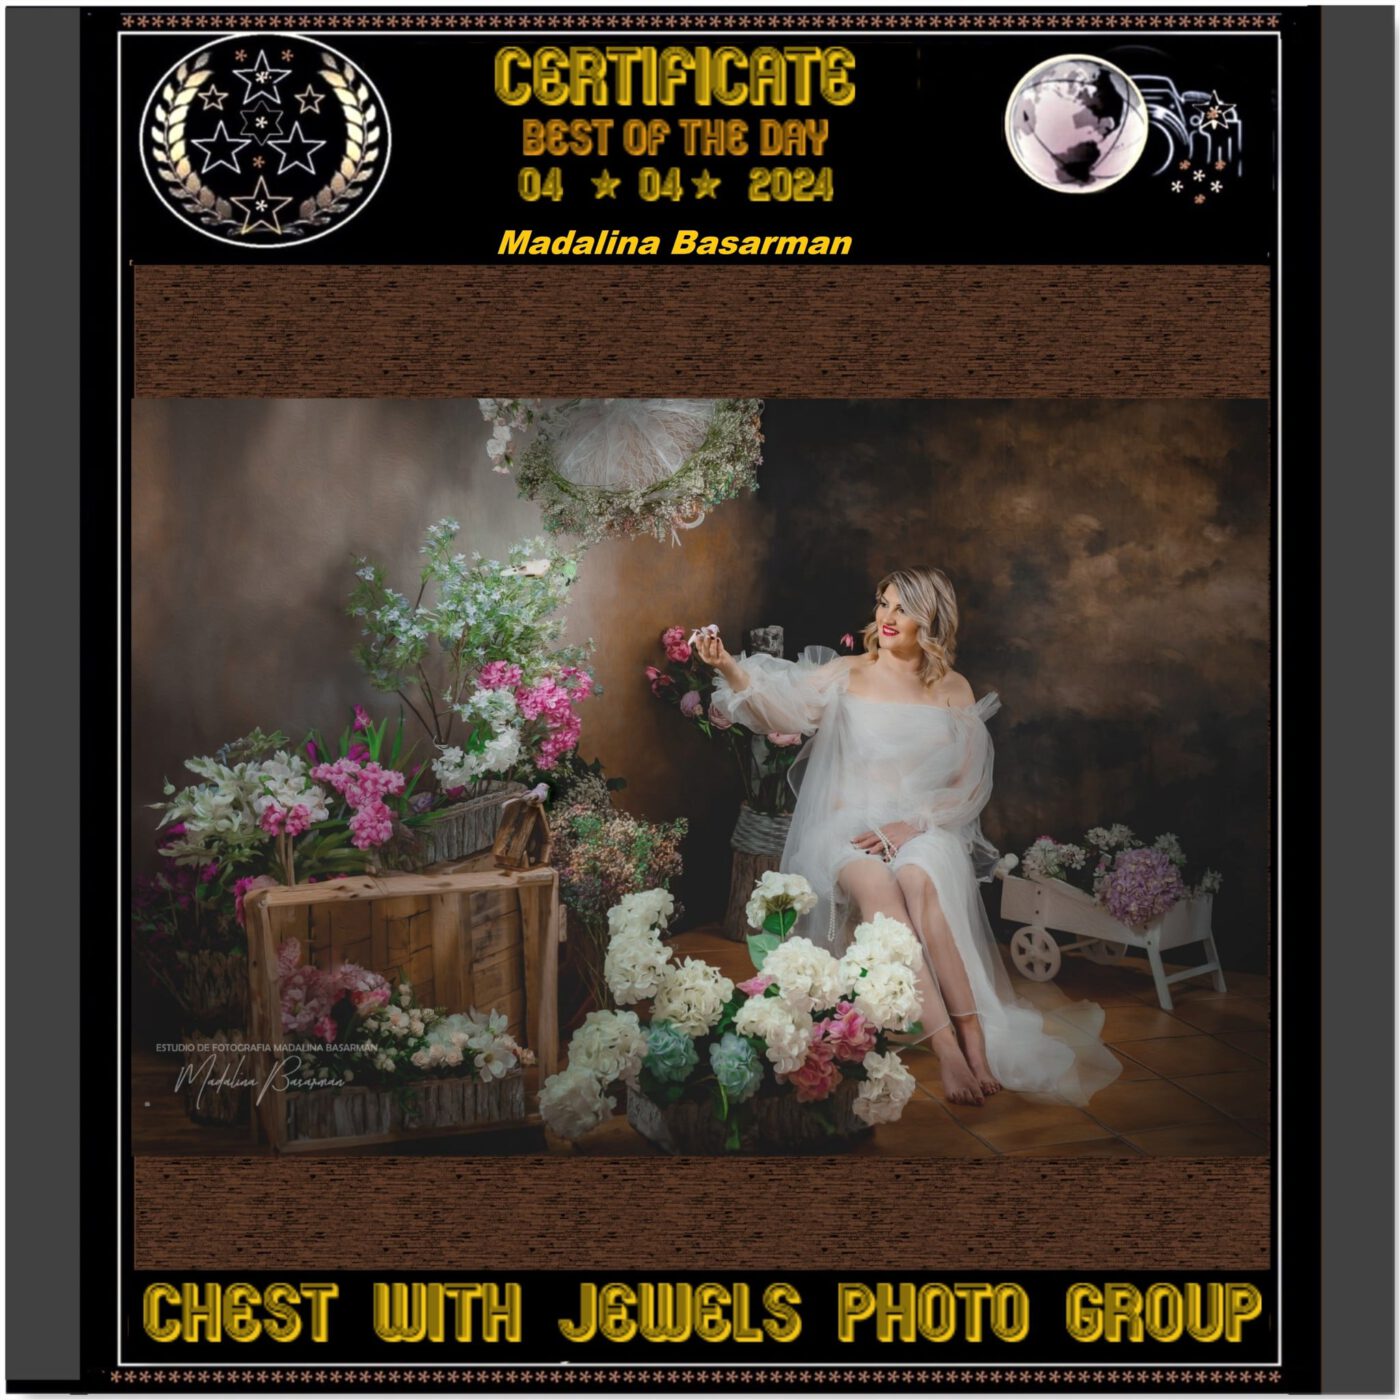 Certificate BEST OF THE DAY Madalina Basarman CHEST WITH JEWELS PHOTO GROUP